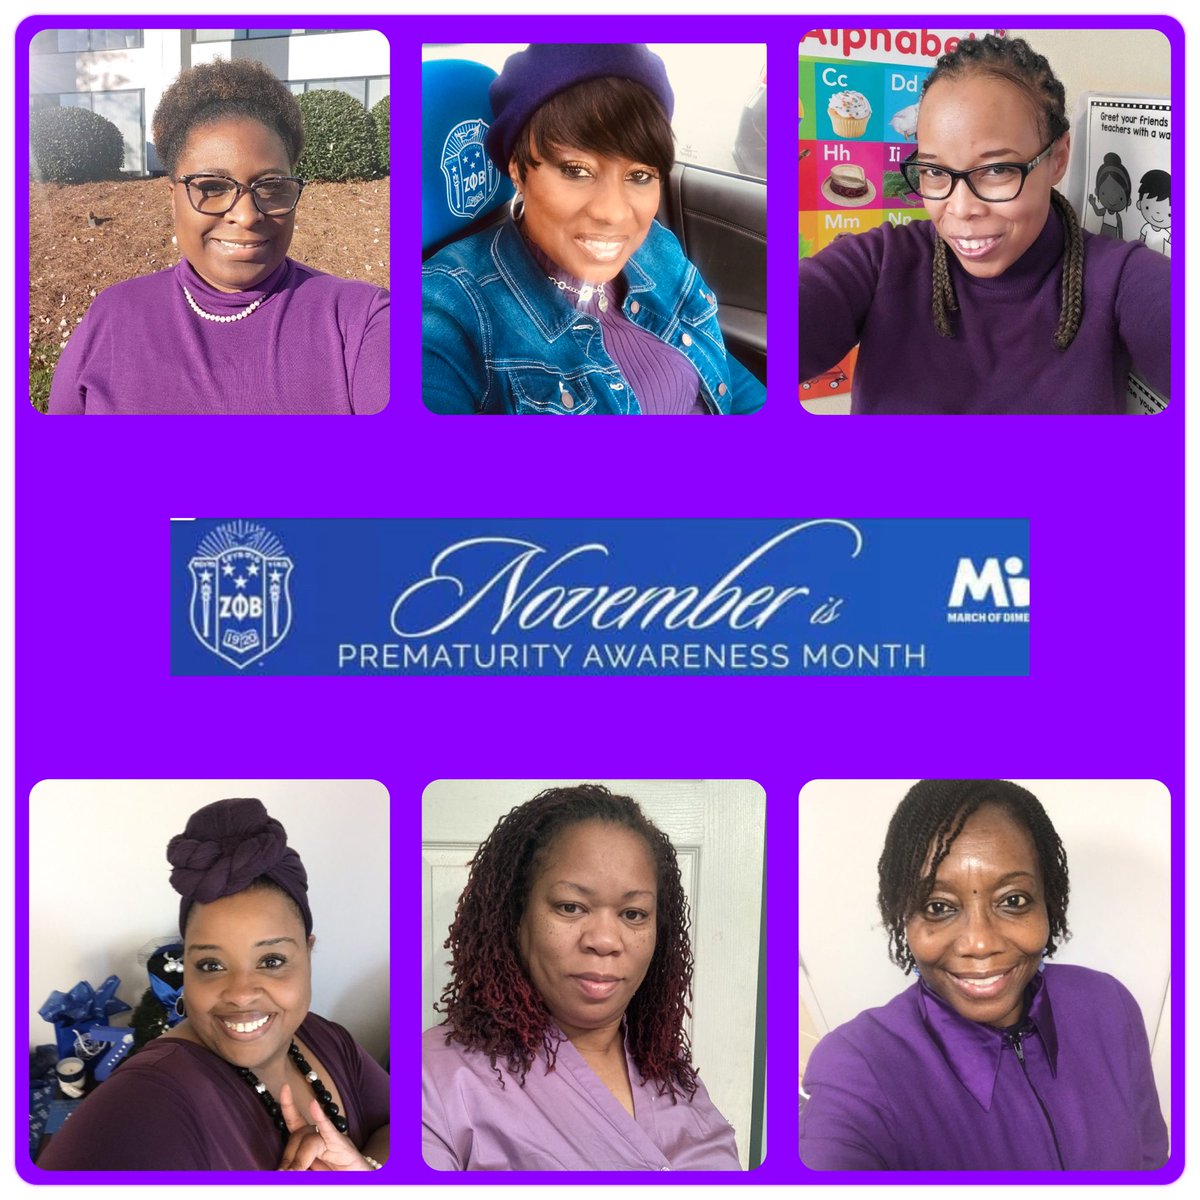 Today is World Prematurity Day and the Ladies of AAKZ are wearing purple to bring awareness to the global crisis of prematurity. #AAKZ #ZPhiBGA #prematurityawareness #zphib1920 #SecondToNone